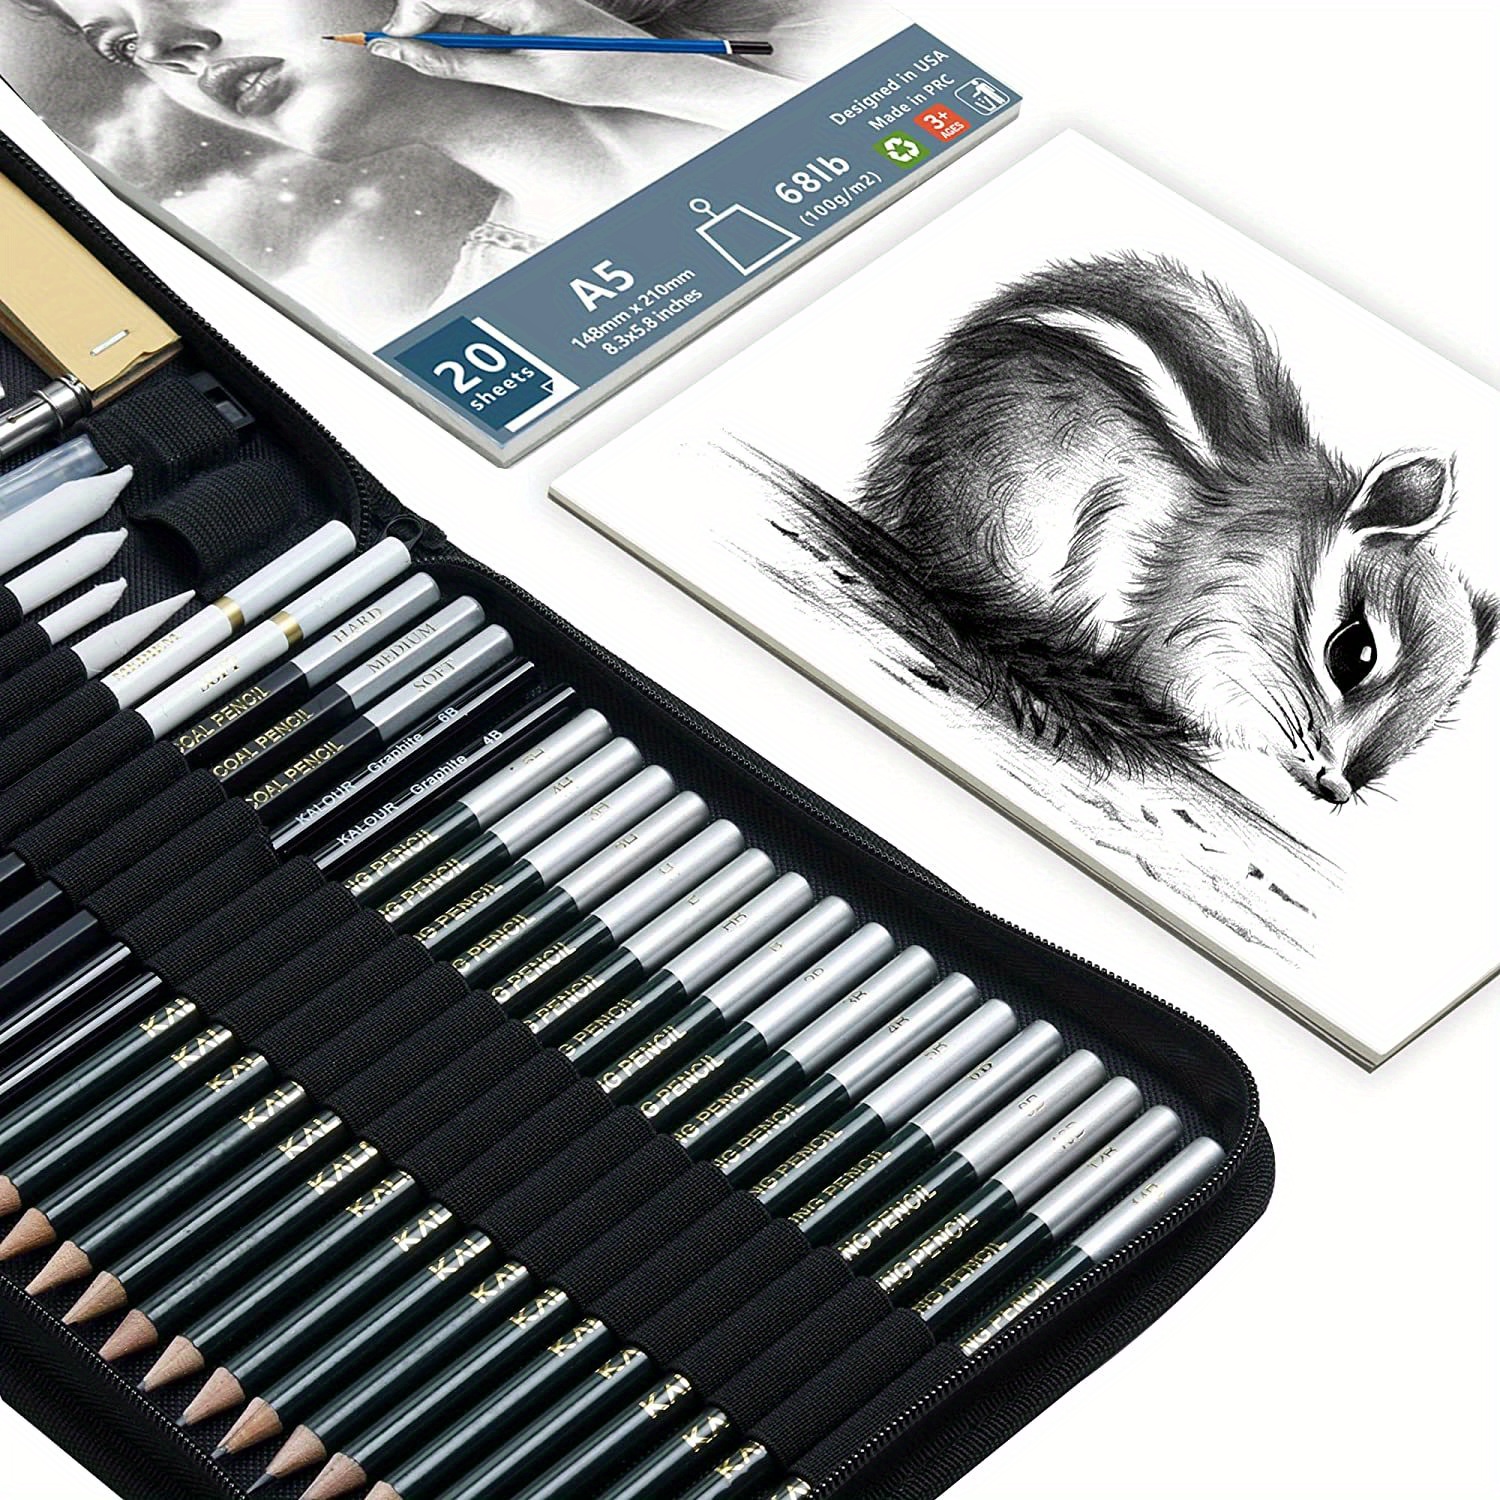  KALOUR 58 Pack Drawing Set Sketch Kit, Sketching Supplies with  3-Color Sketchbook,Graphite & Charcoal Pencils,A5 SketchBook,Tutorial, Pro  Art Drawing Kit for Artists Adults Beginner : Arts, Crafts & Sewing